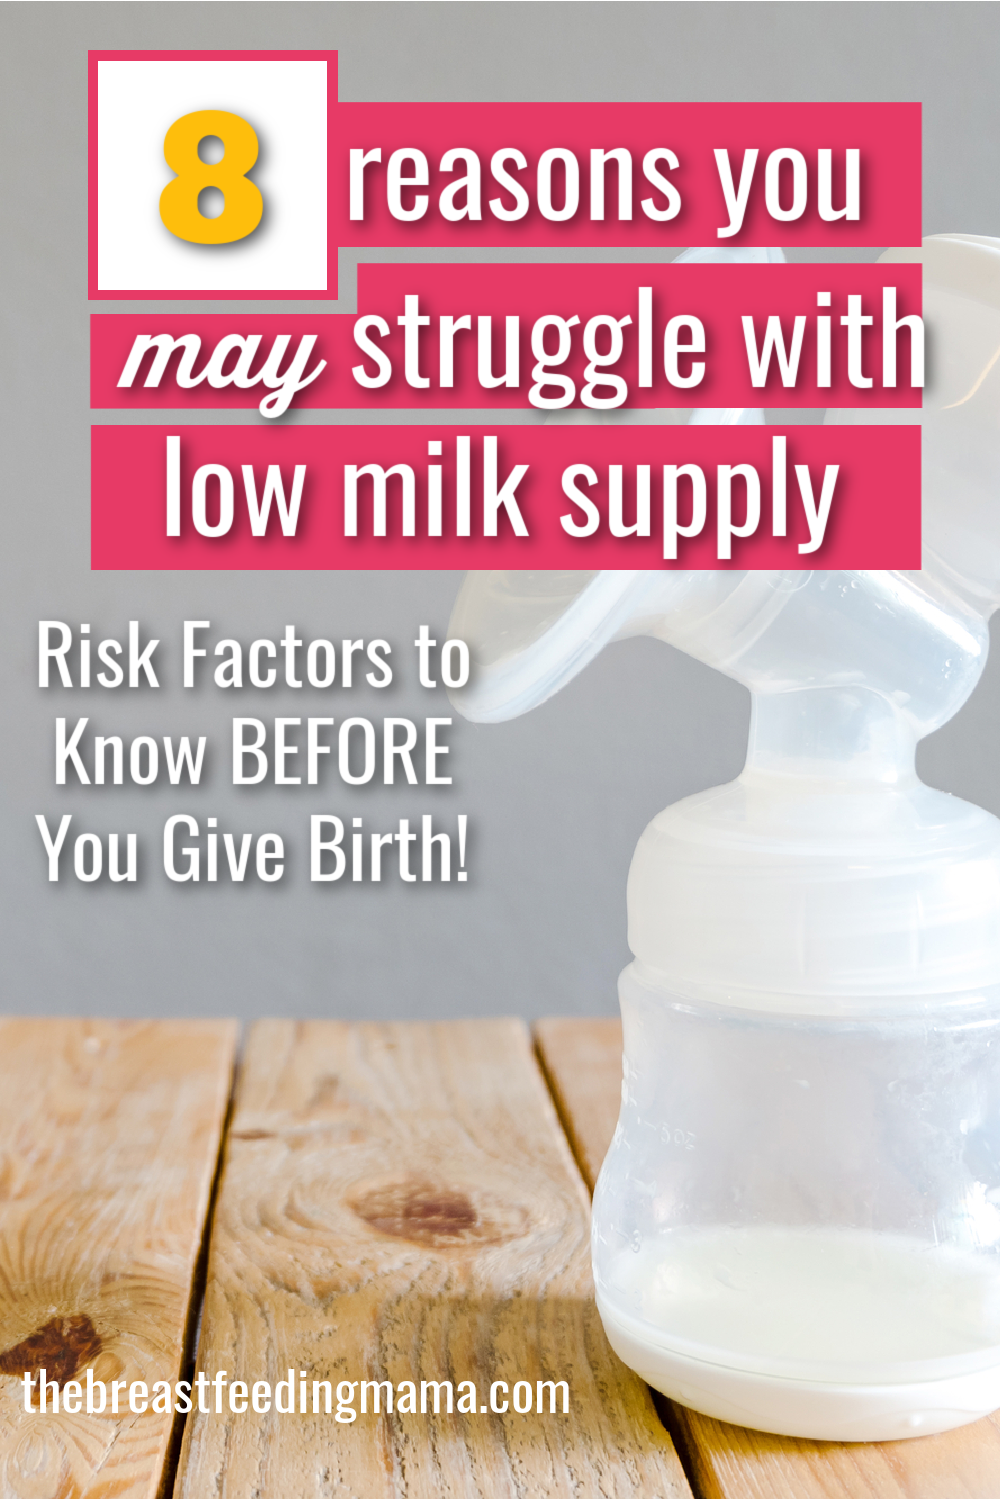 Eight Risk Factors for Low Milk Supply